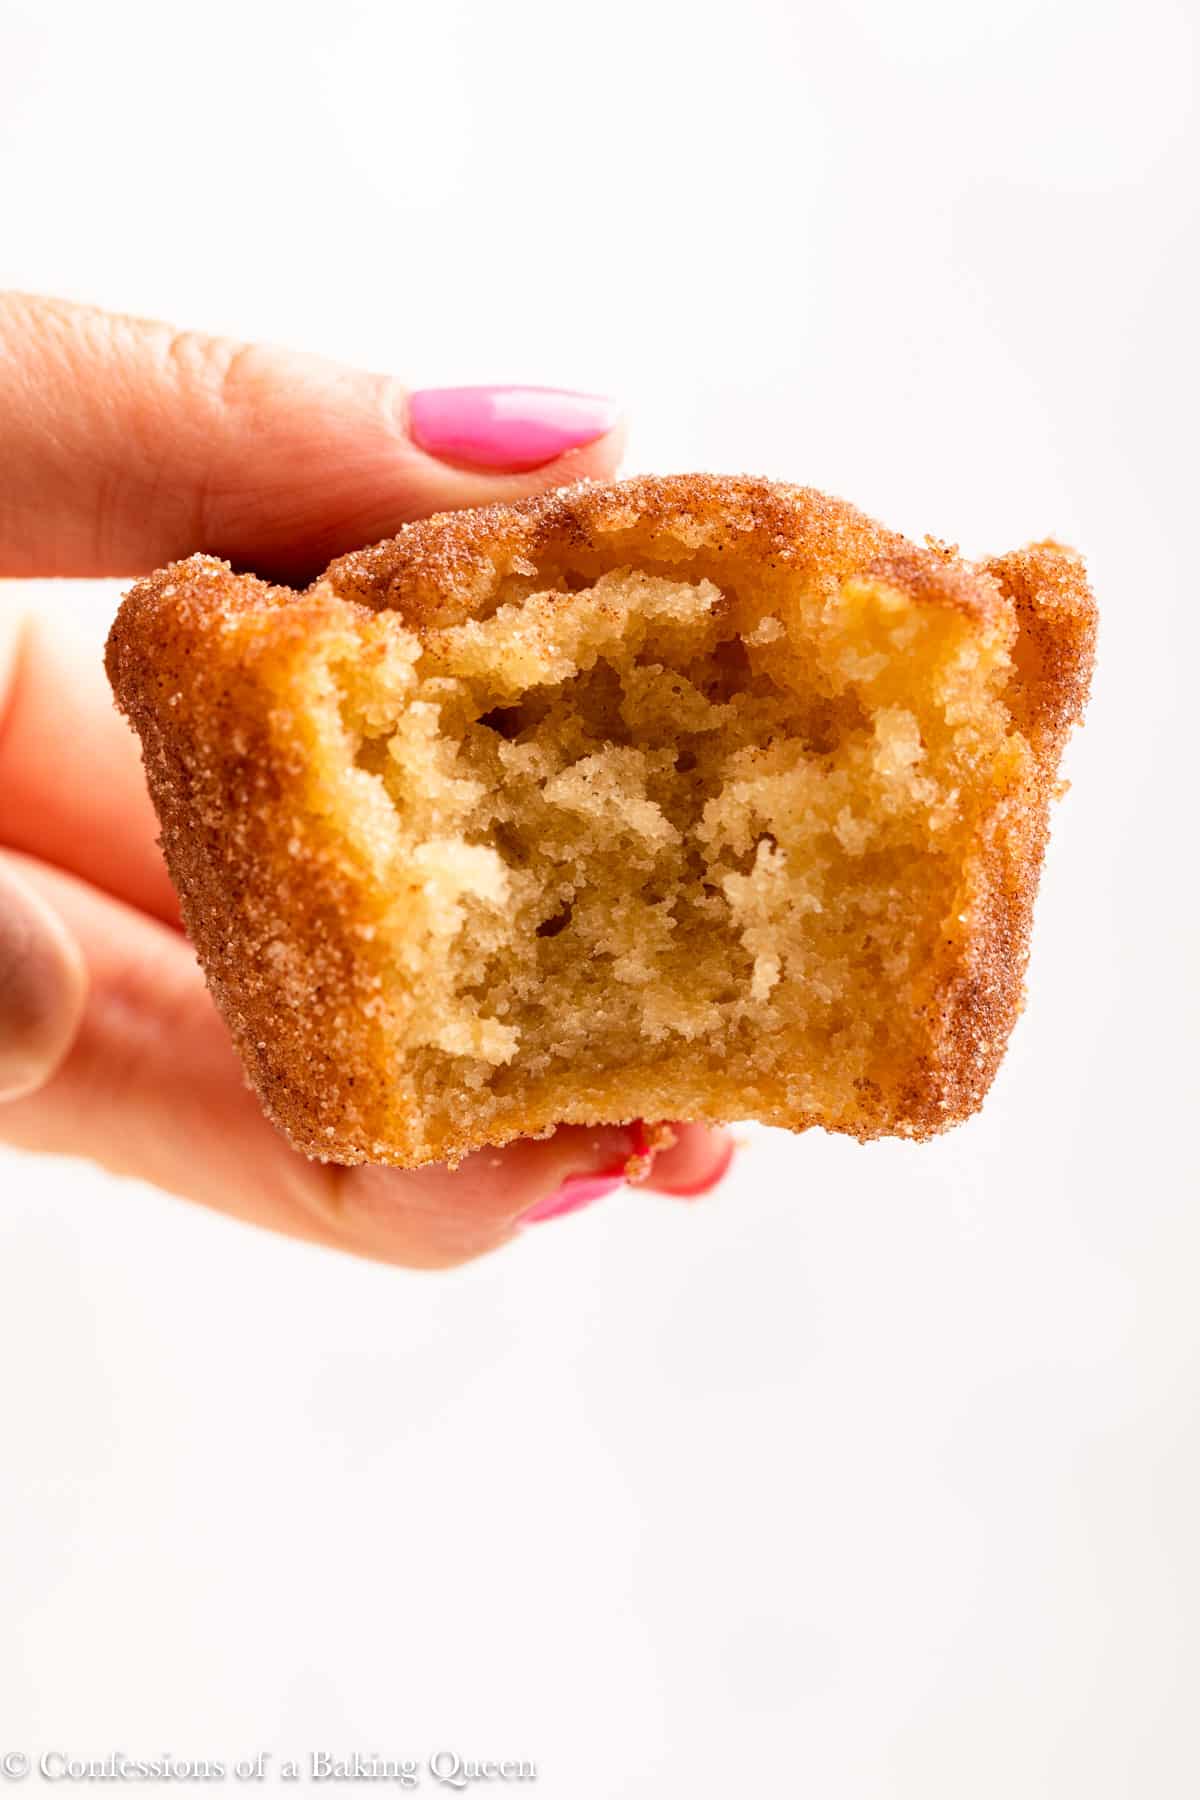 A hand holding a cinnamon muffin with a bite taken out of it.